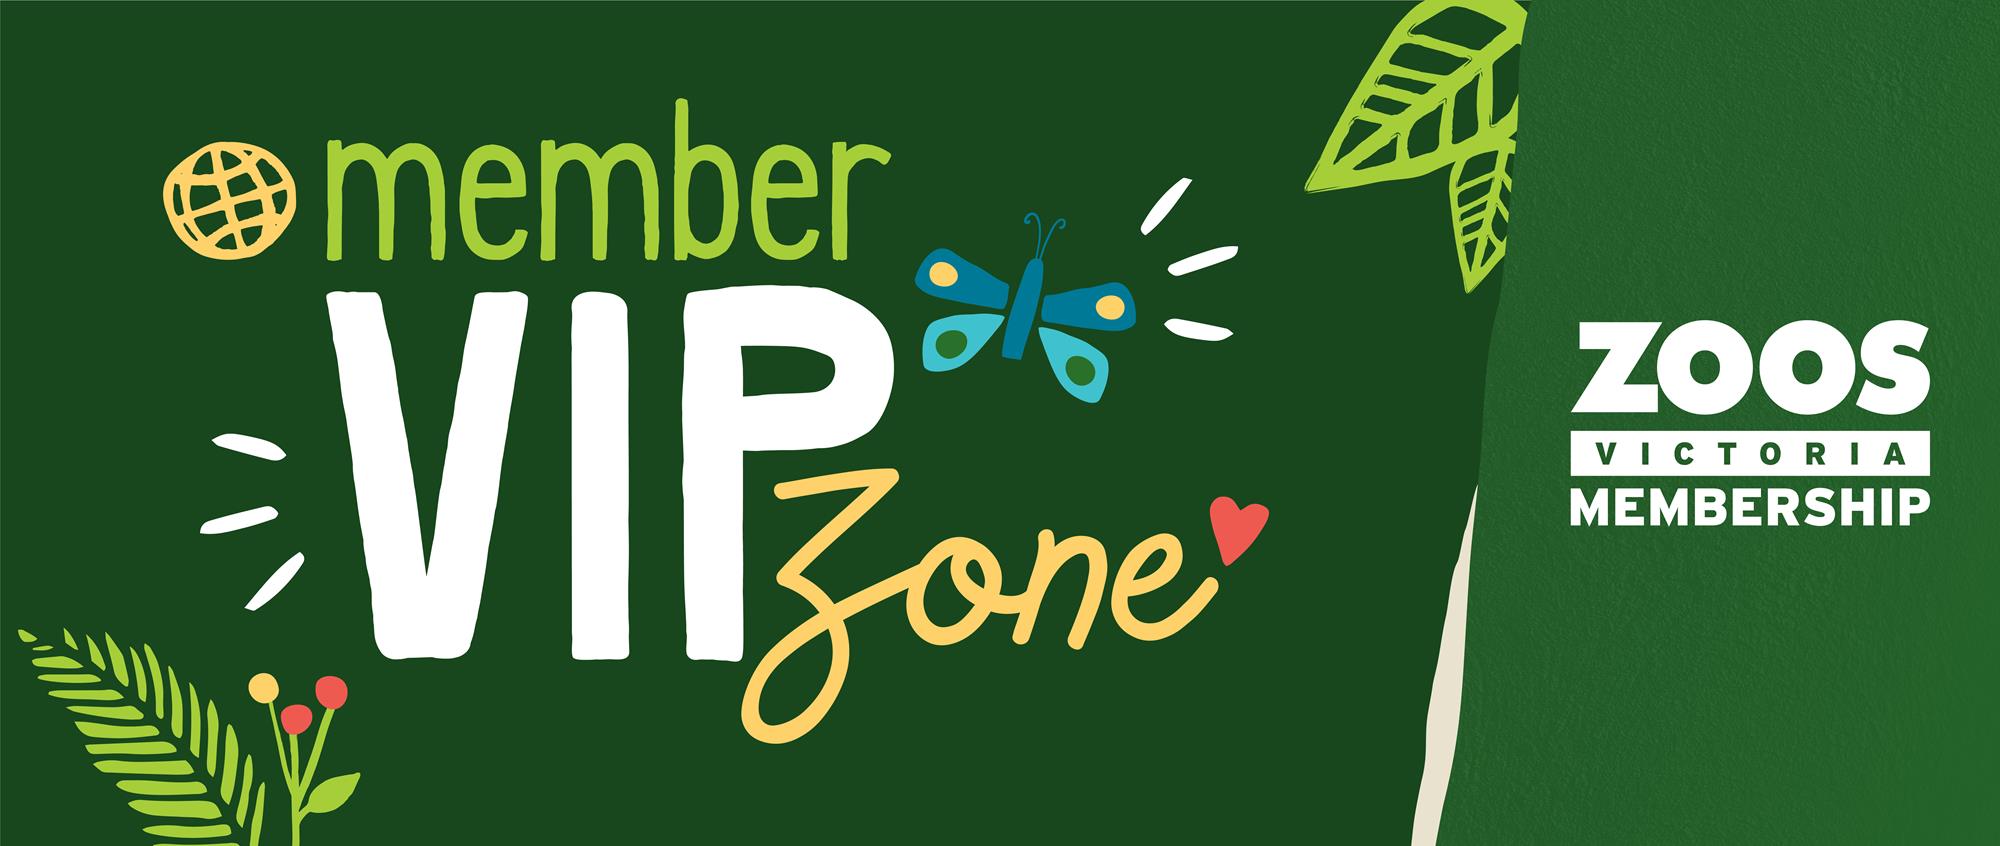 Member VIP Zone, Zoos Victoria Membership; a green logo graphic with ferns and a Butterfly.